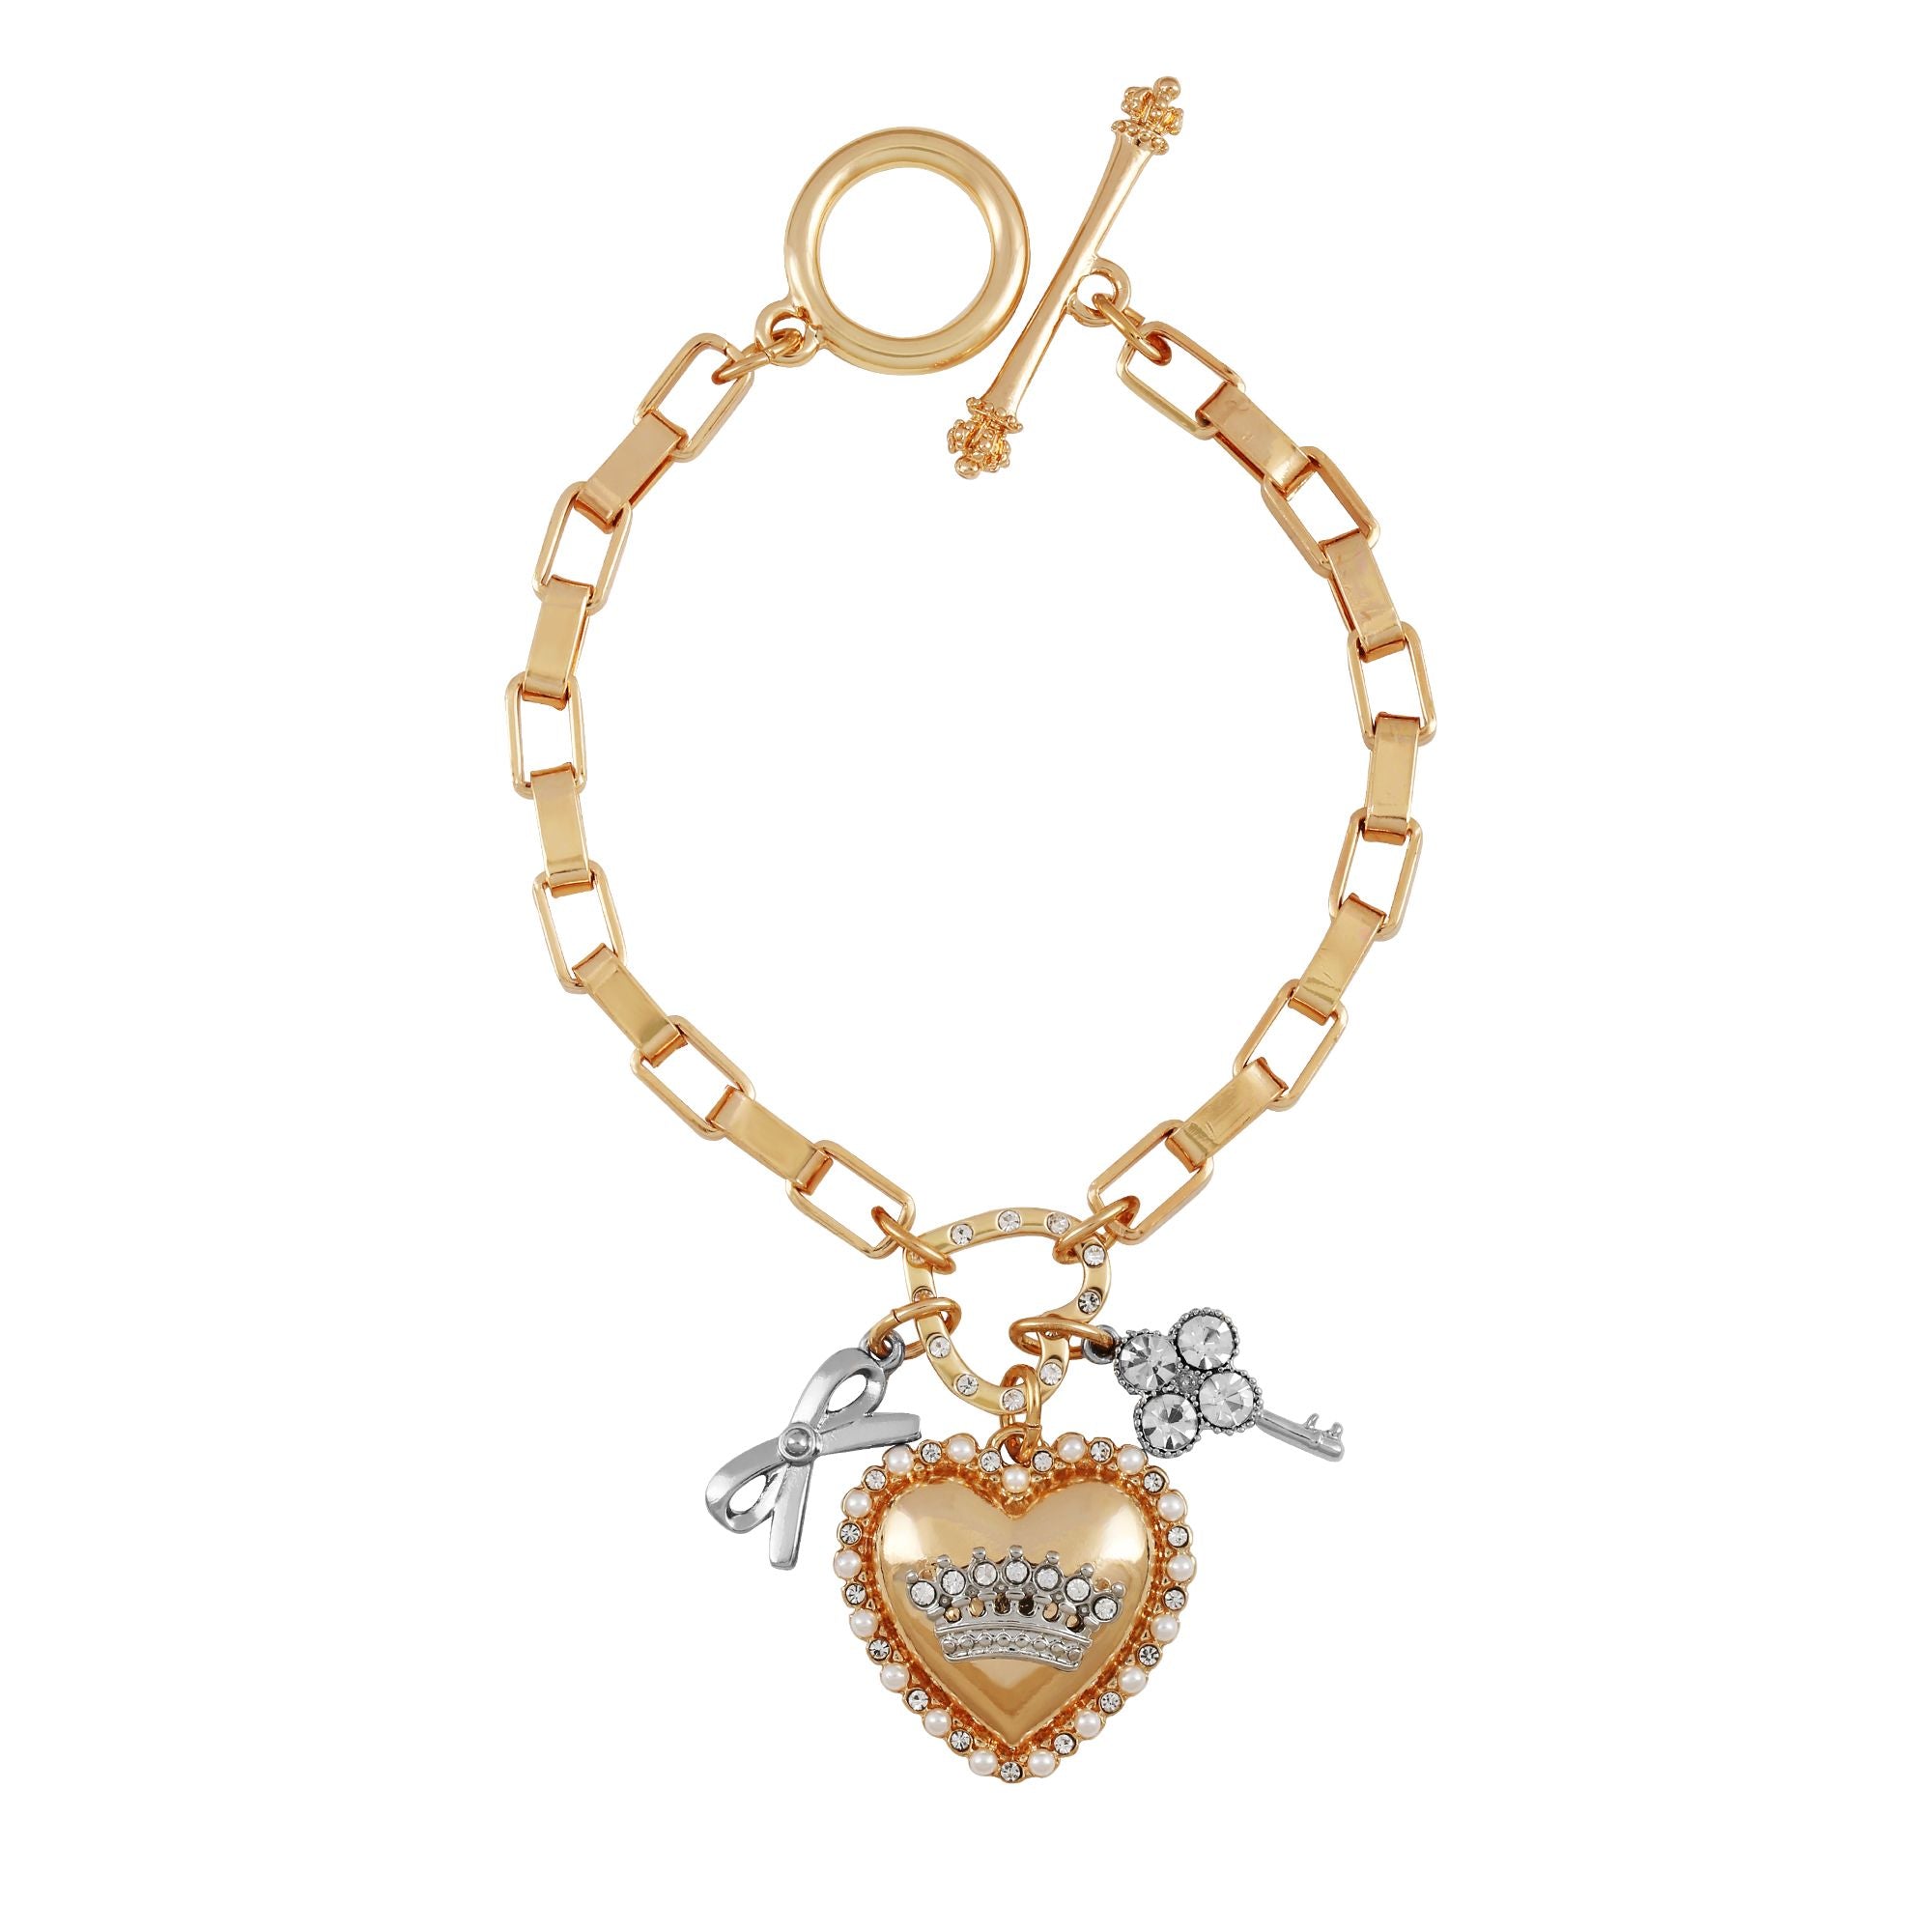 JUICY COUTURE jewelry large chain bracelet with charms lock,cherry,  heart,crown